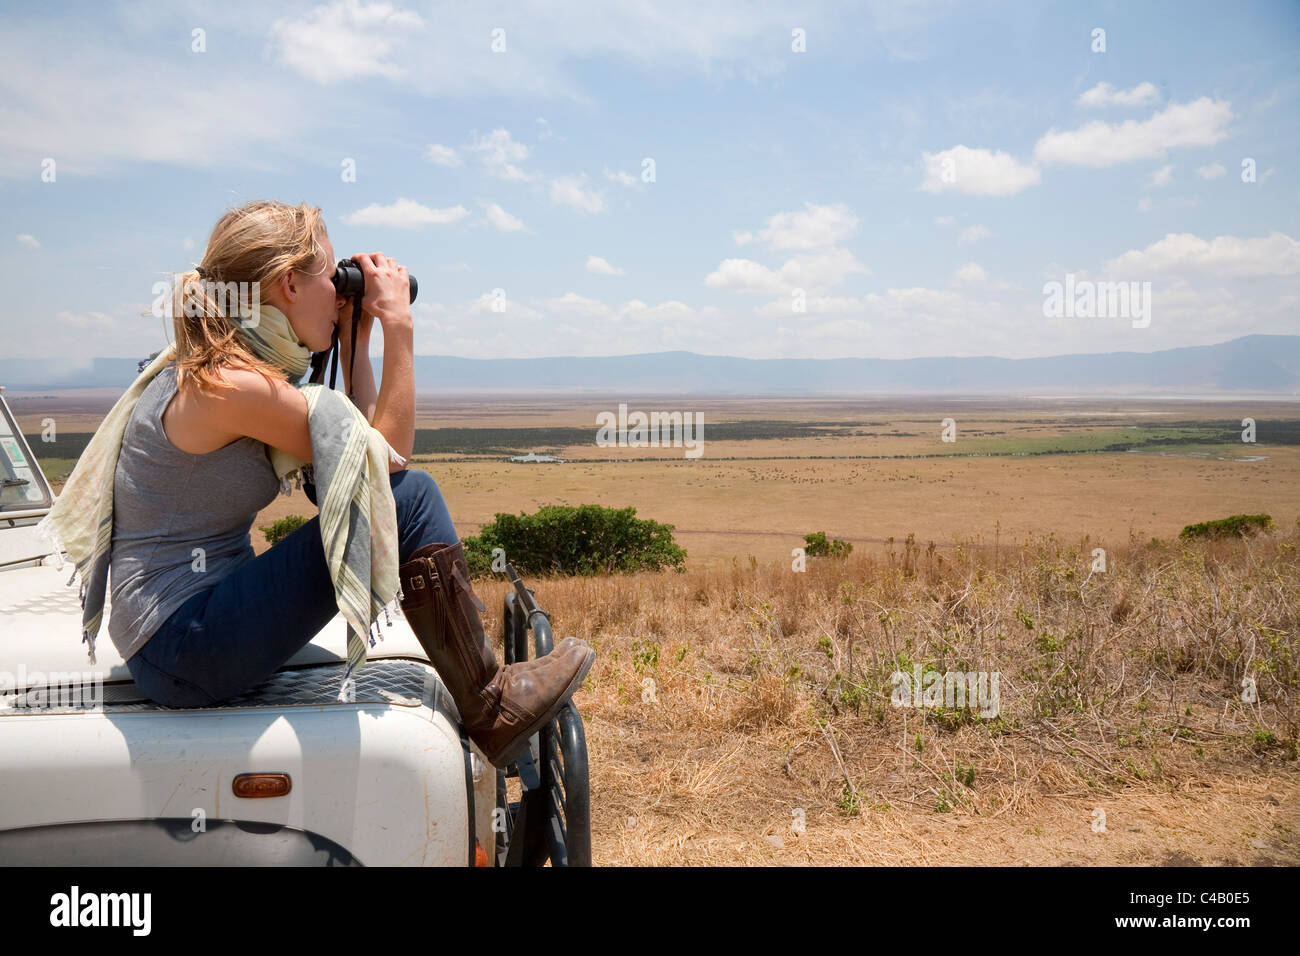 Tanzania, Ngorongoro. A tourist looks out over the Ngorongoro Crater from the bonnet of her Land Rover. MR. Stock Photo